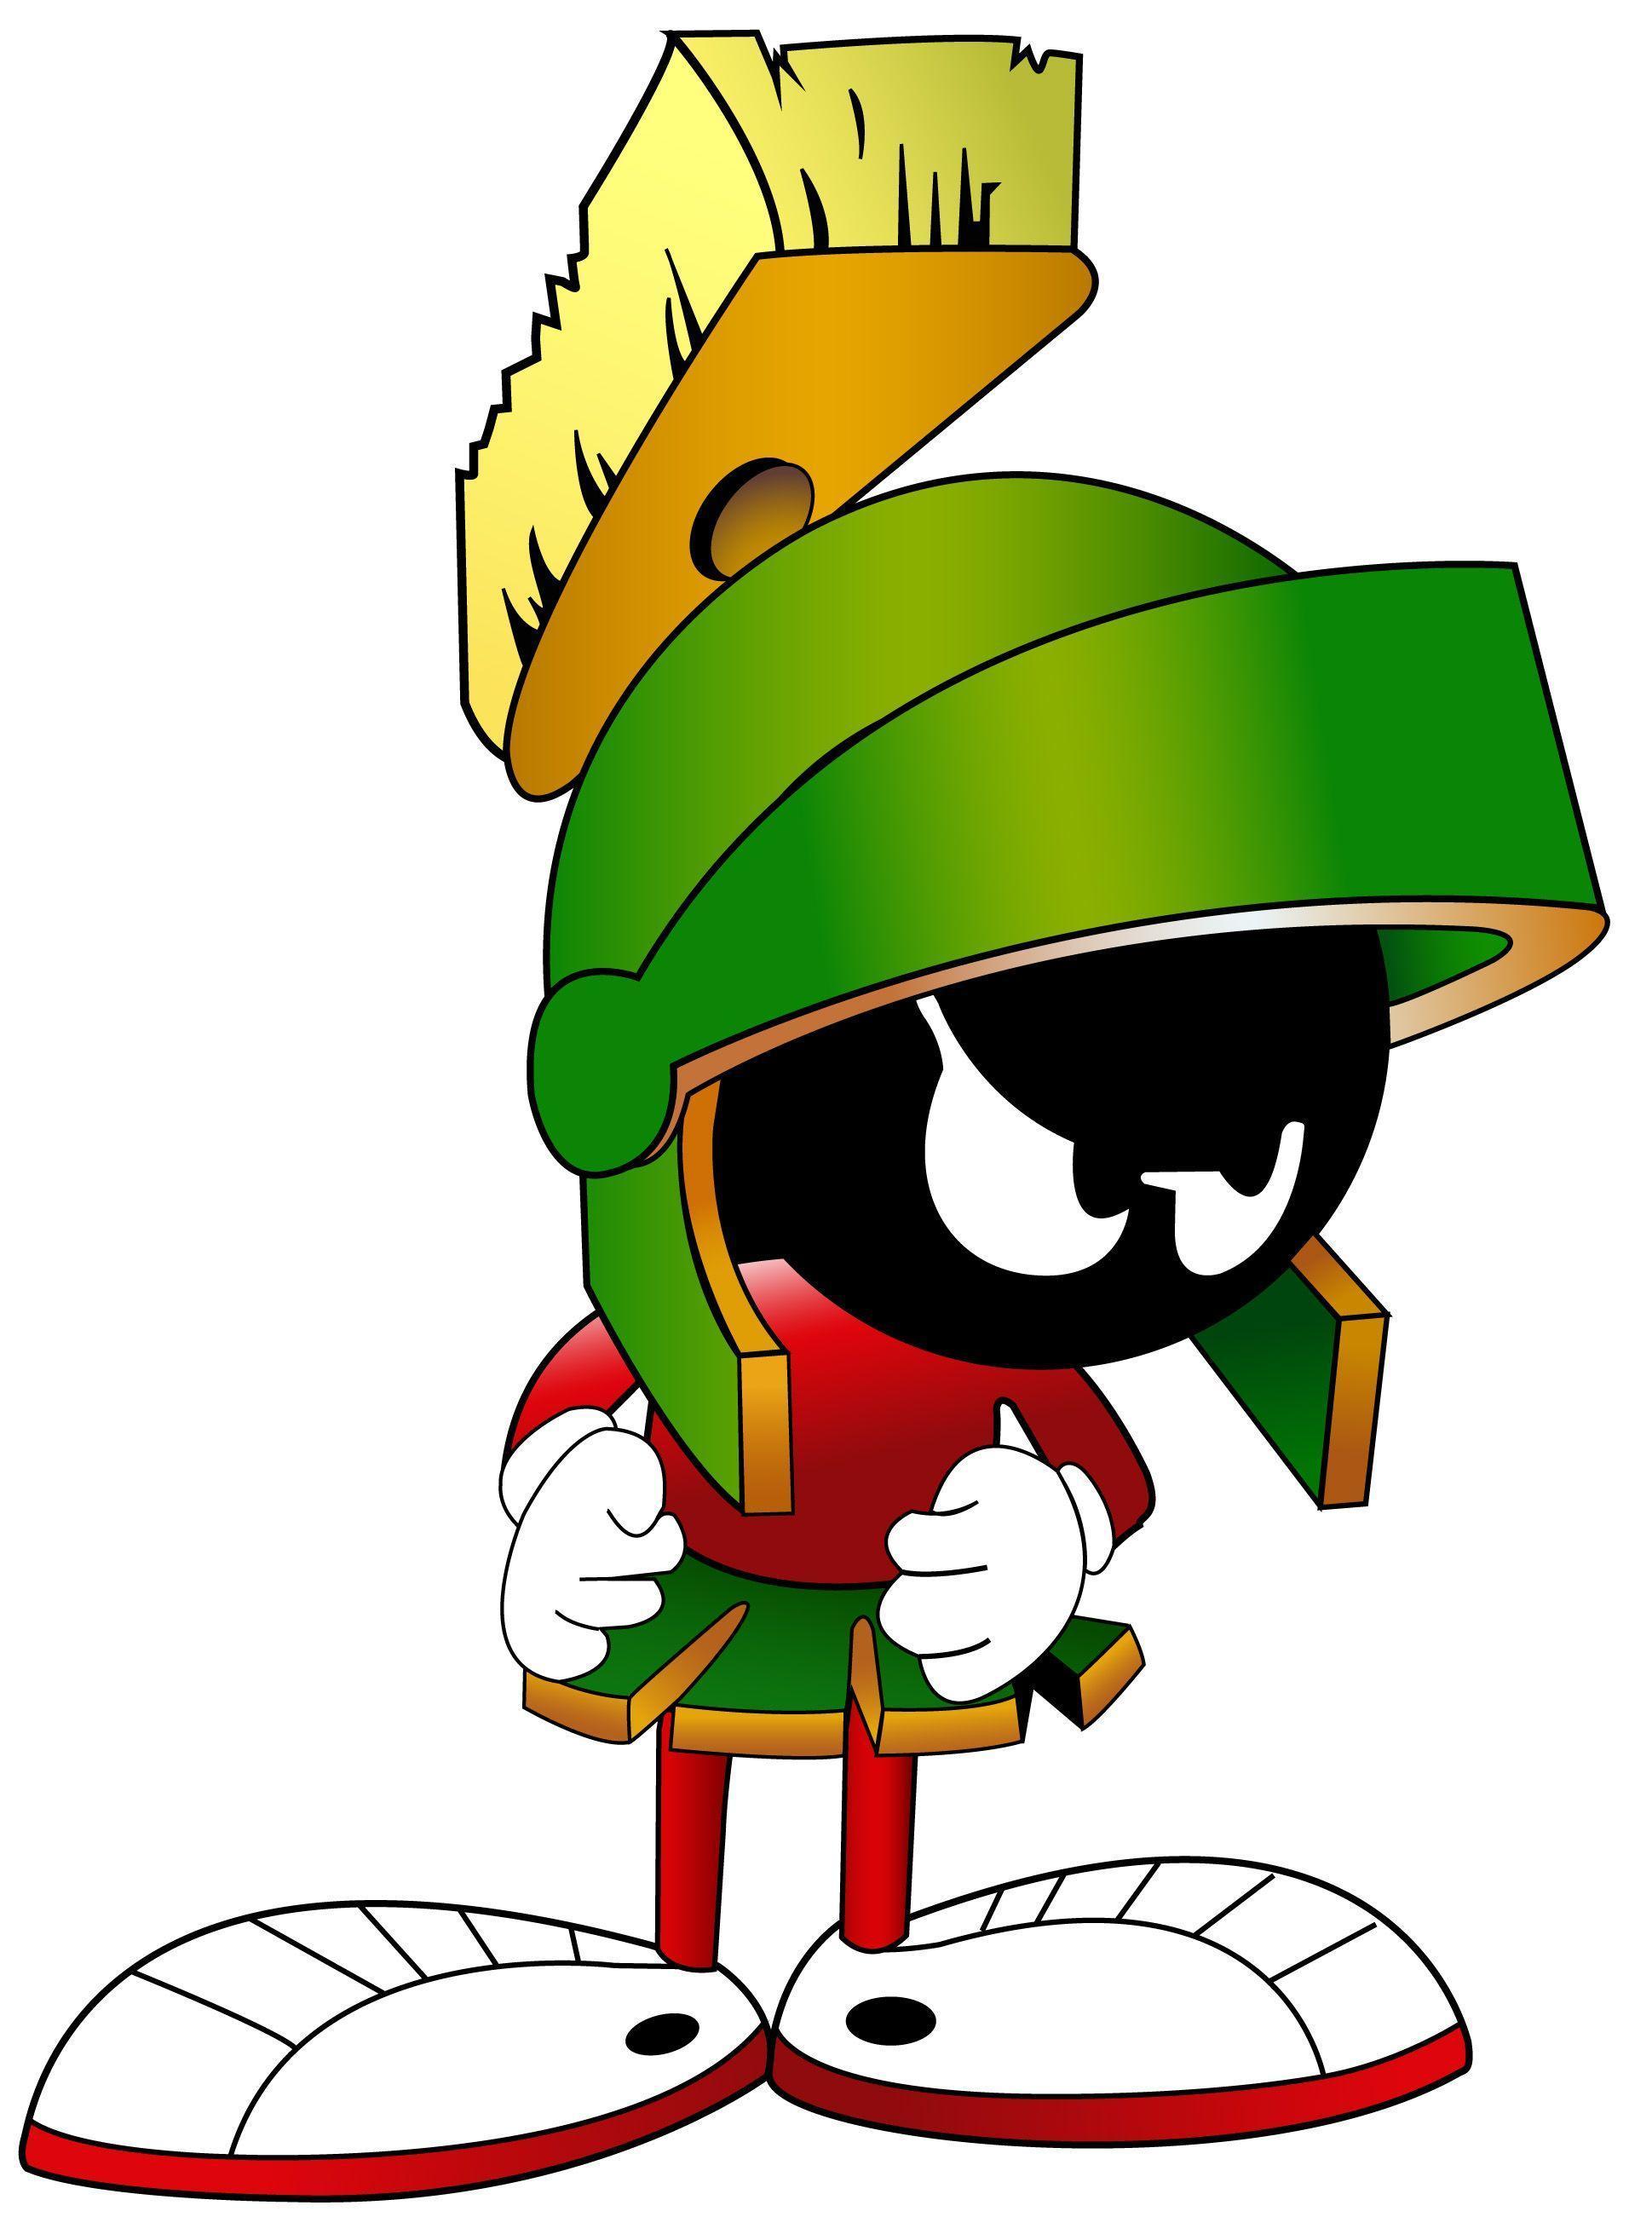 Marvin The Martian Gallery. Looney Tunes Wiki Powered